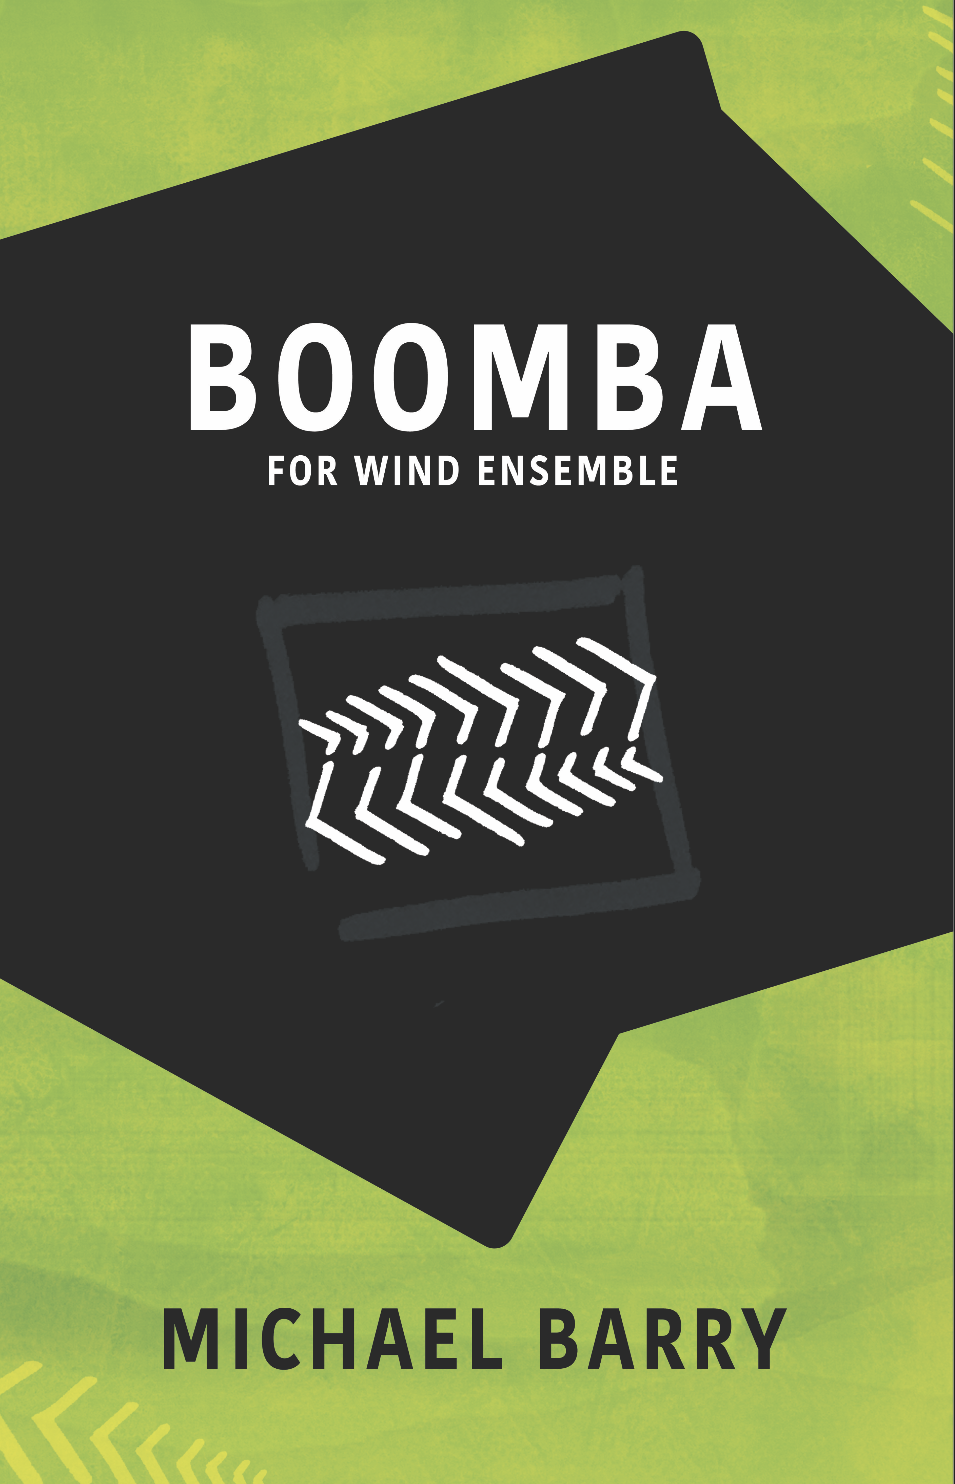 Boomba (Score Only) by Michael Barry